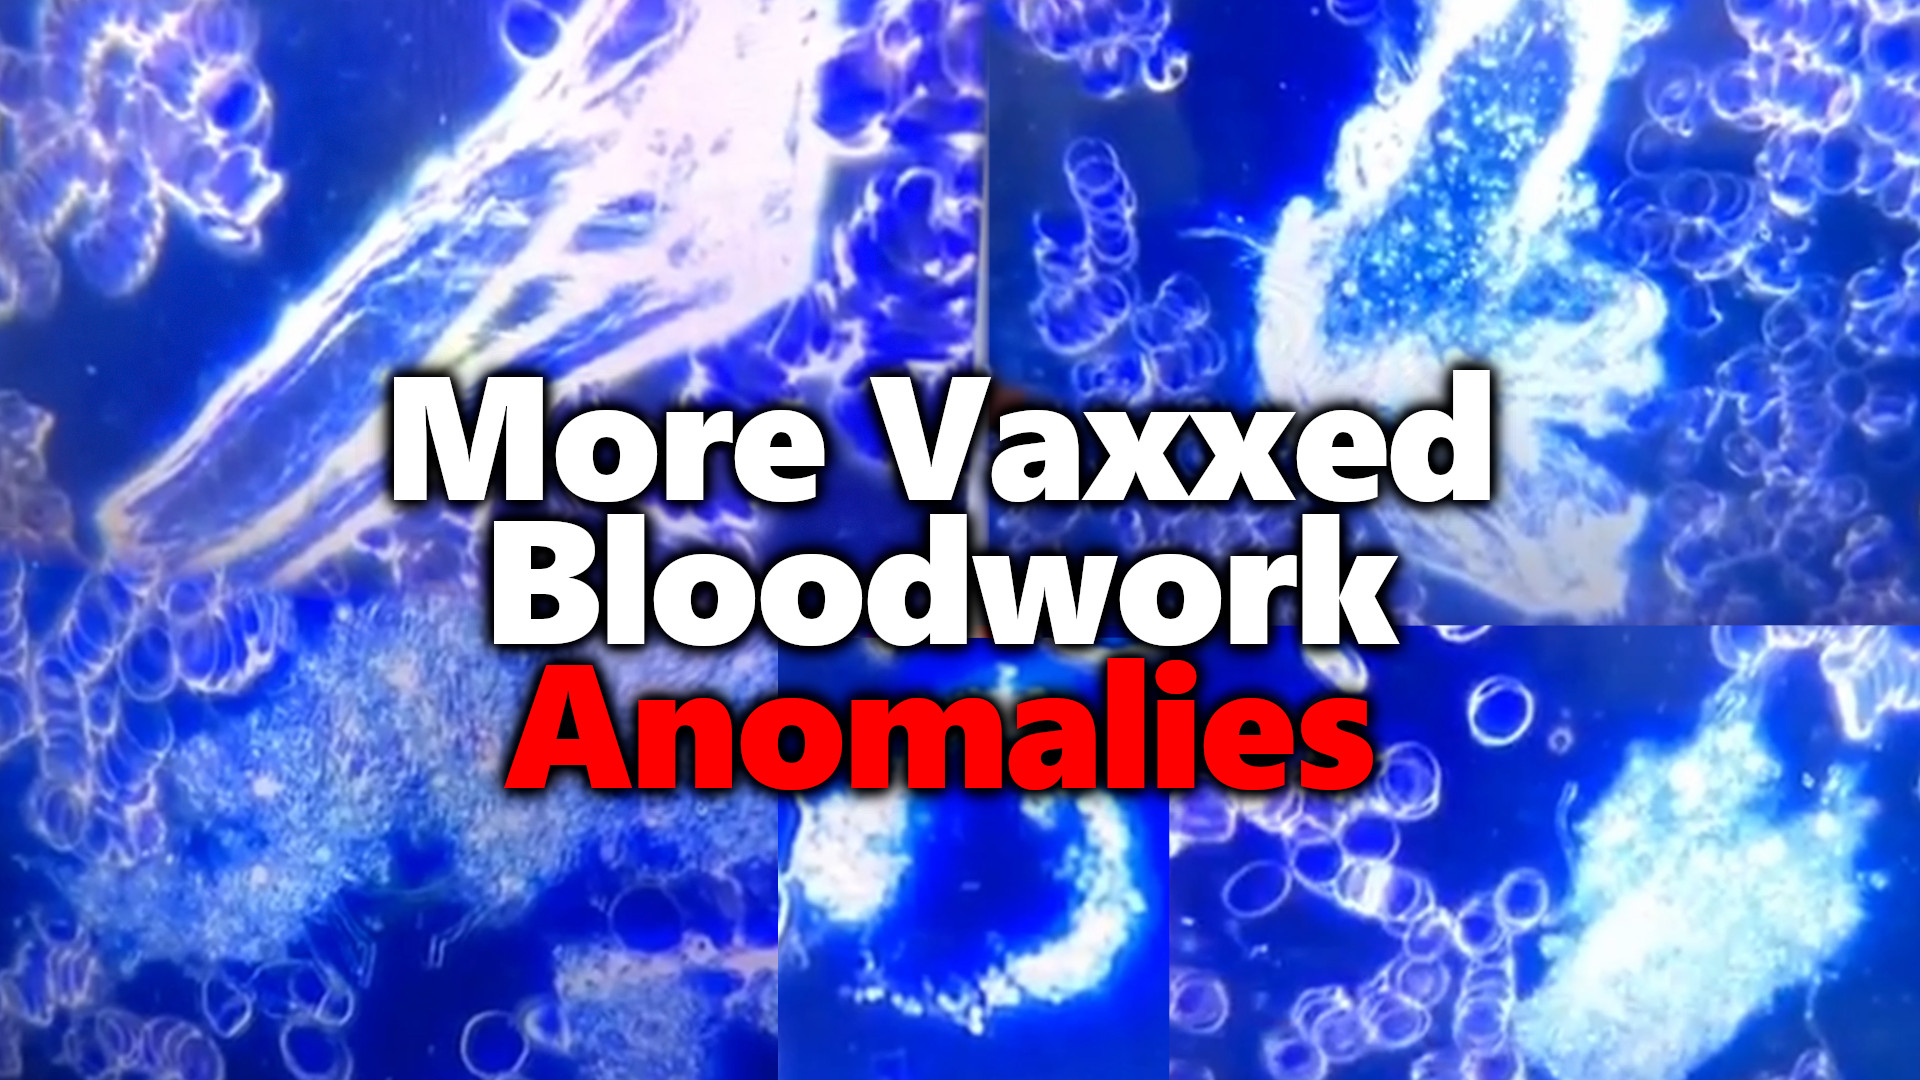 More #ClotShot Bloodwork Analysis: Another Doctor Blows Whistle On Post-Vaccine Anomalies & Mystery Objects